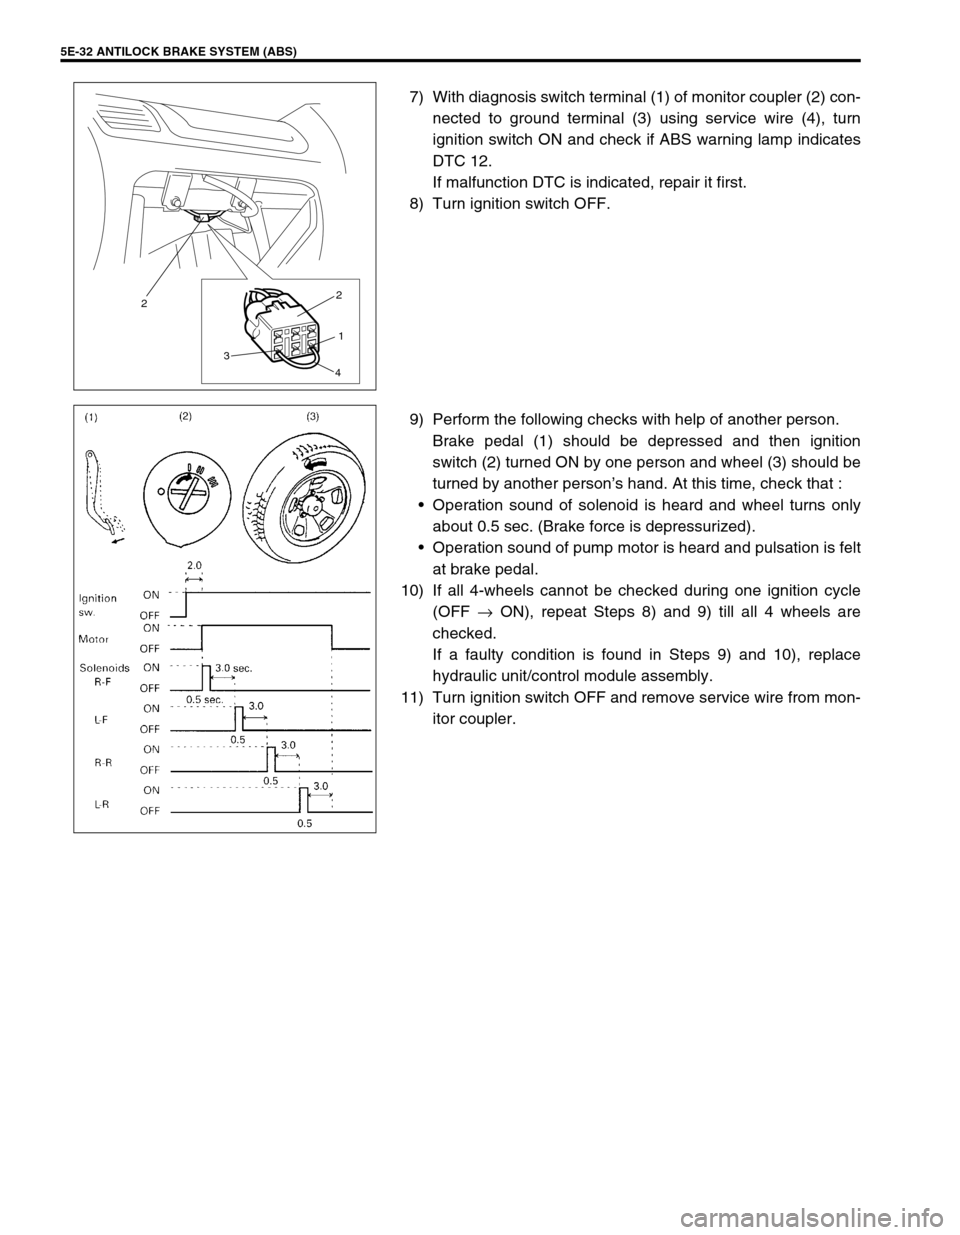 SUZUKI SWIFT 2000 1.G RG413 Service Owners Manual 5E-32 ANTILOCK BRAKE SYSTEM (ABS)
7) With diagnosis switch terminal (1) of monitor coupler (2) con-
nected to ground terminal (3) using service wire (4), turn
ignition switch ON and check if ABS warni